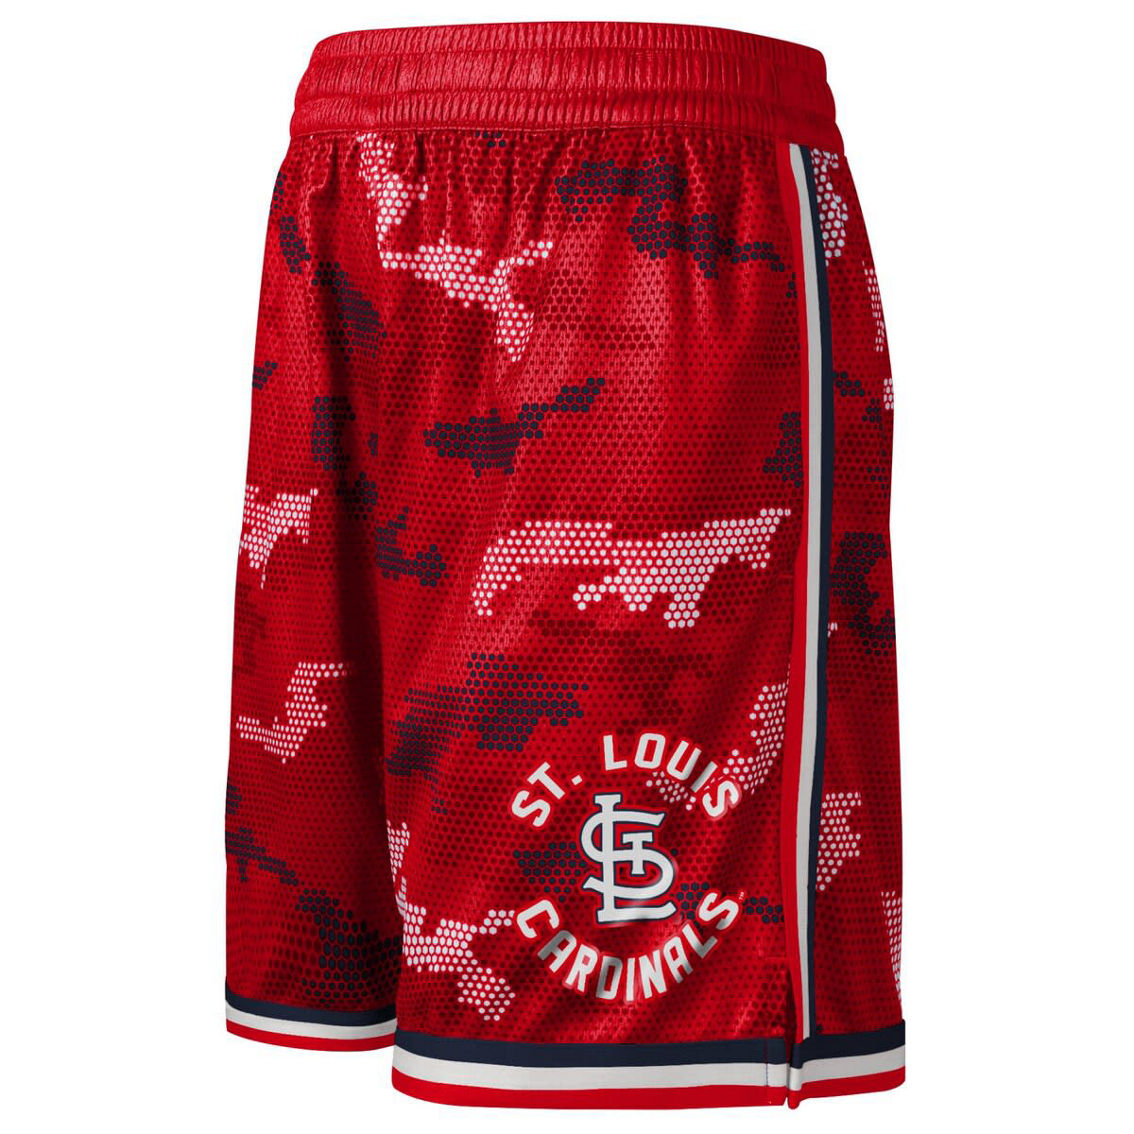 Outerstuff Youth Fanatics Red St. Louis Cardinals Tech Runner Shorts - Image 3 of 4